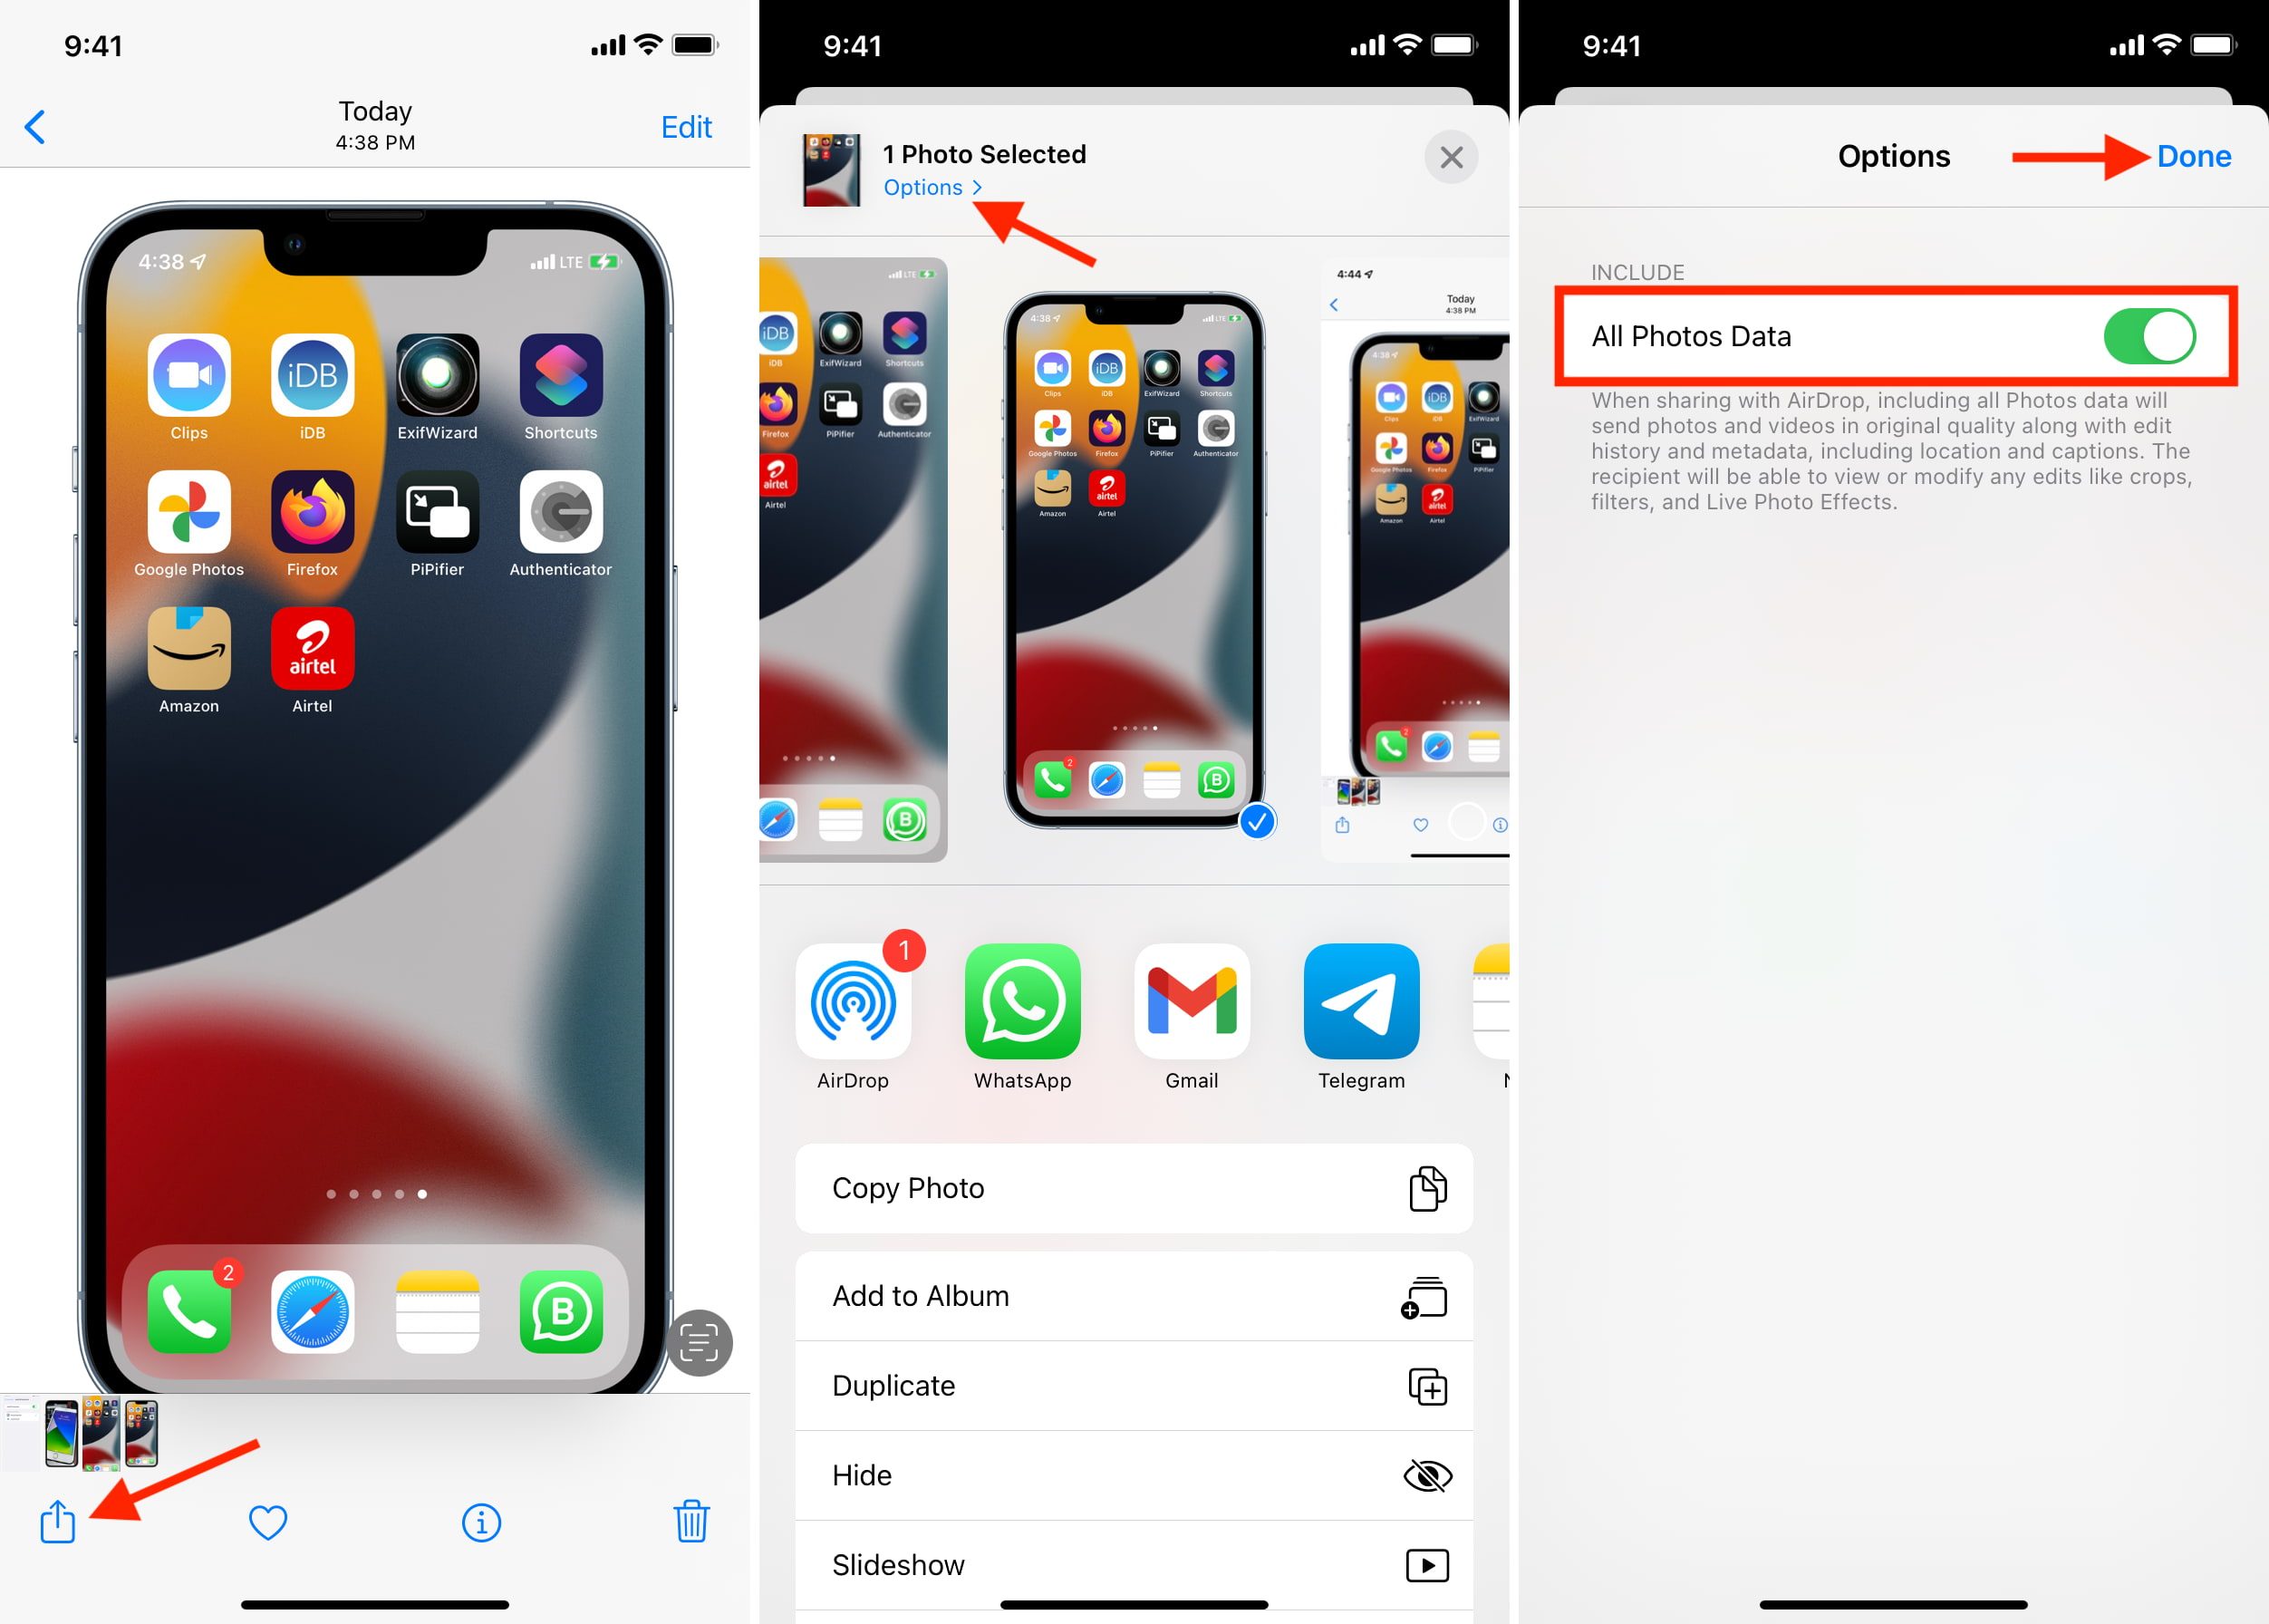 Enable All Photos Data before AirDrop in iPhone Photos app